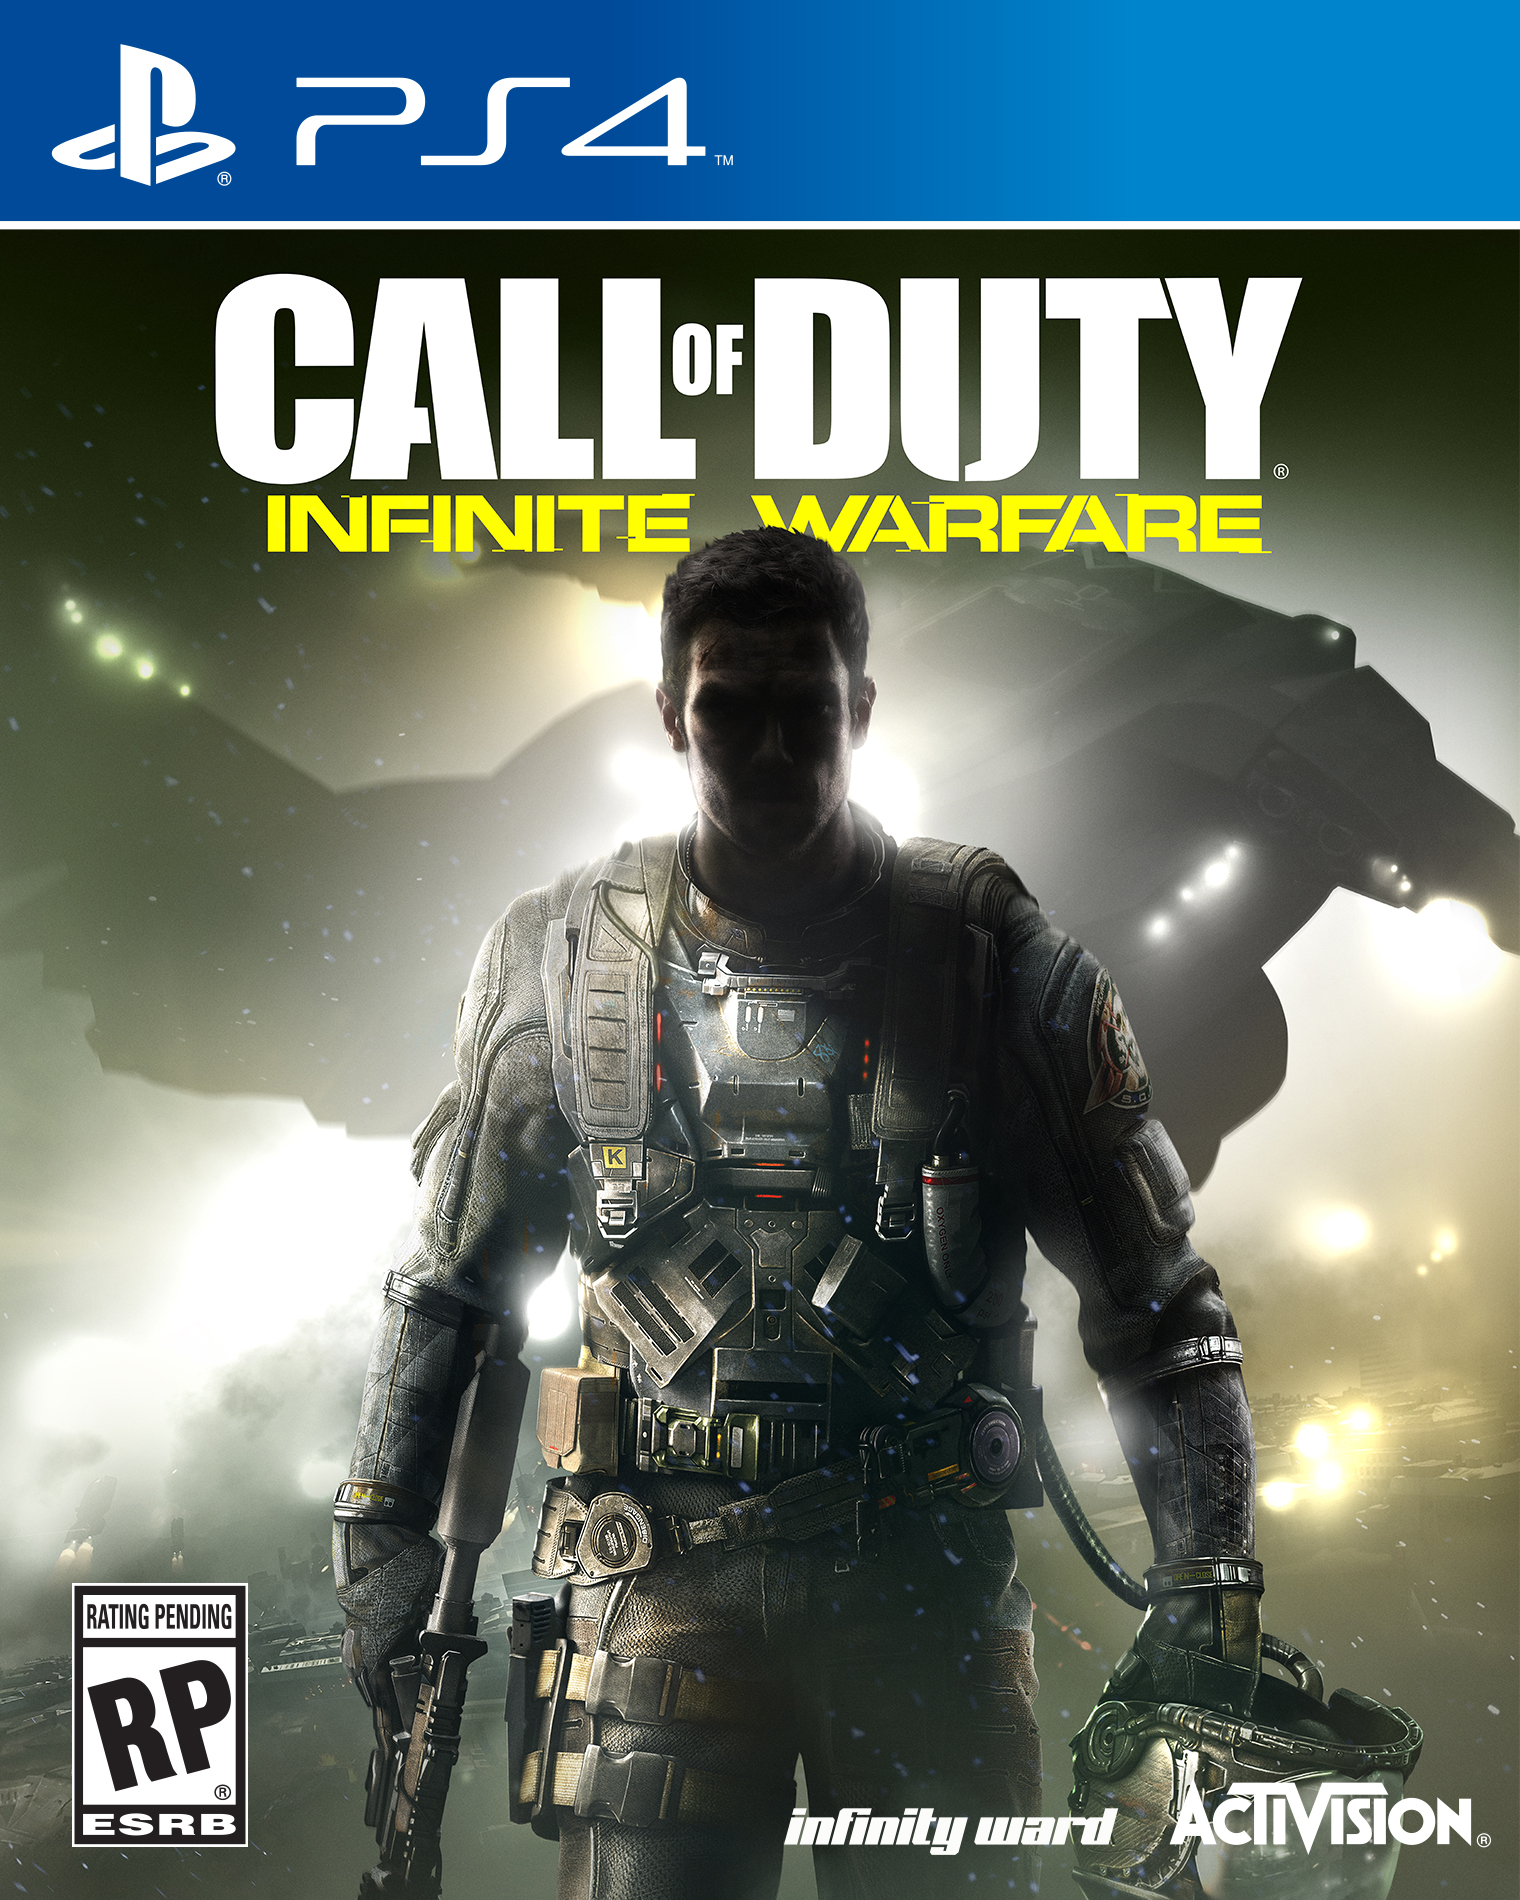 Imagen CoD IW Box Art PS4.png Call of Duty Wiki FANDOM powered by